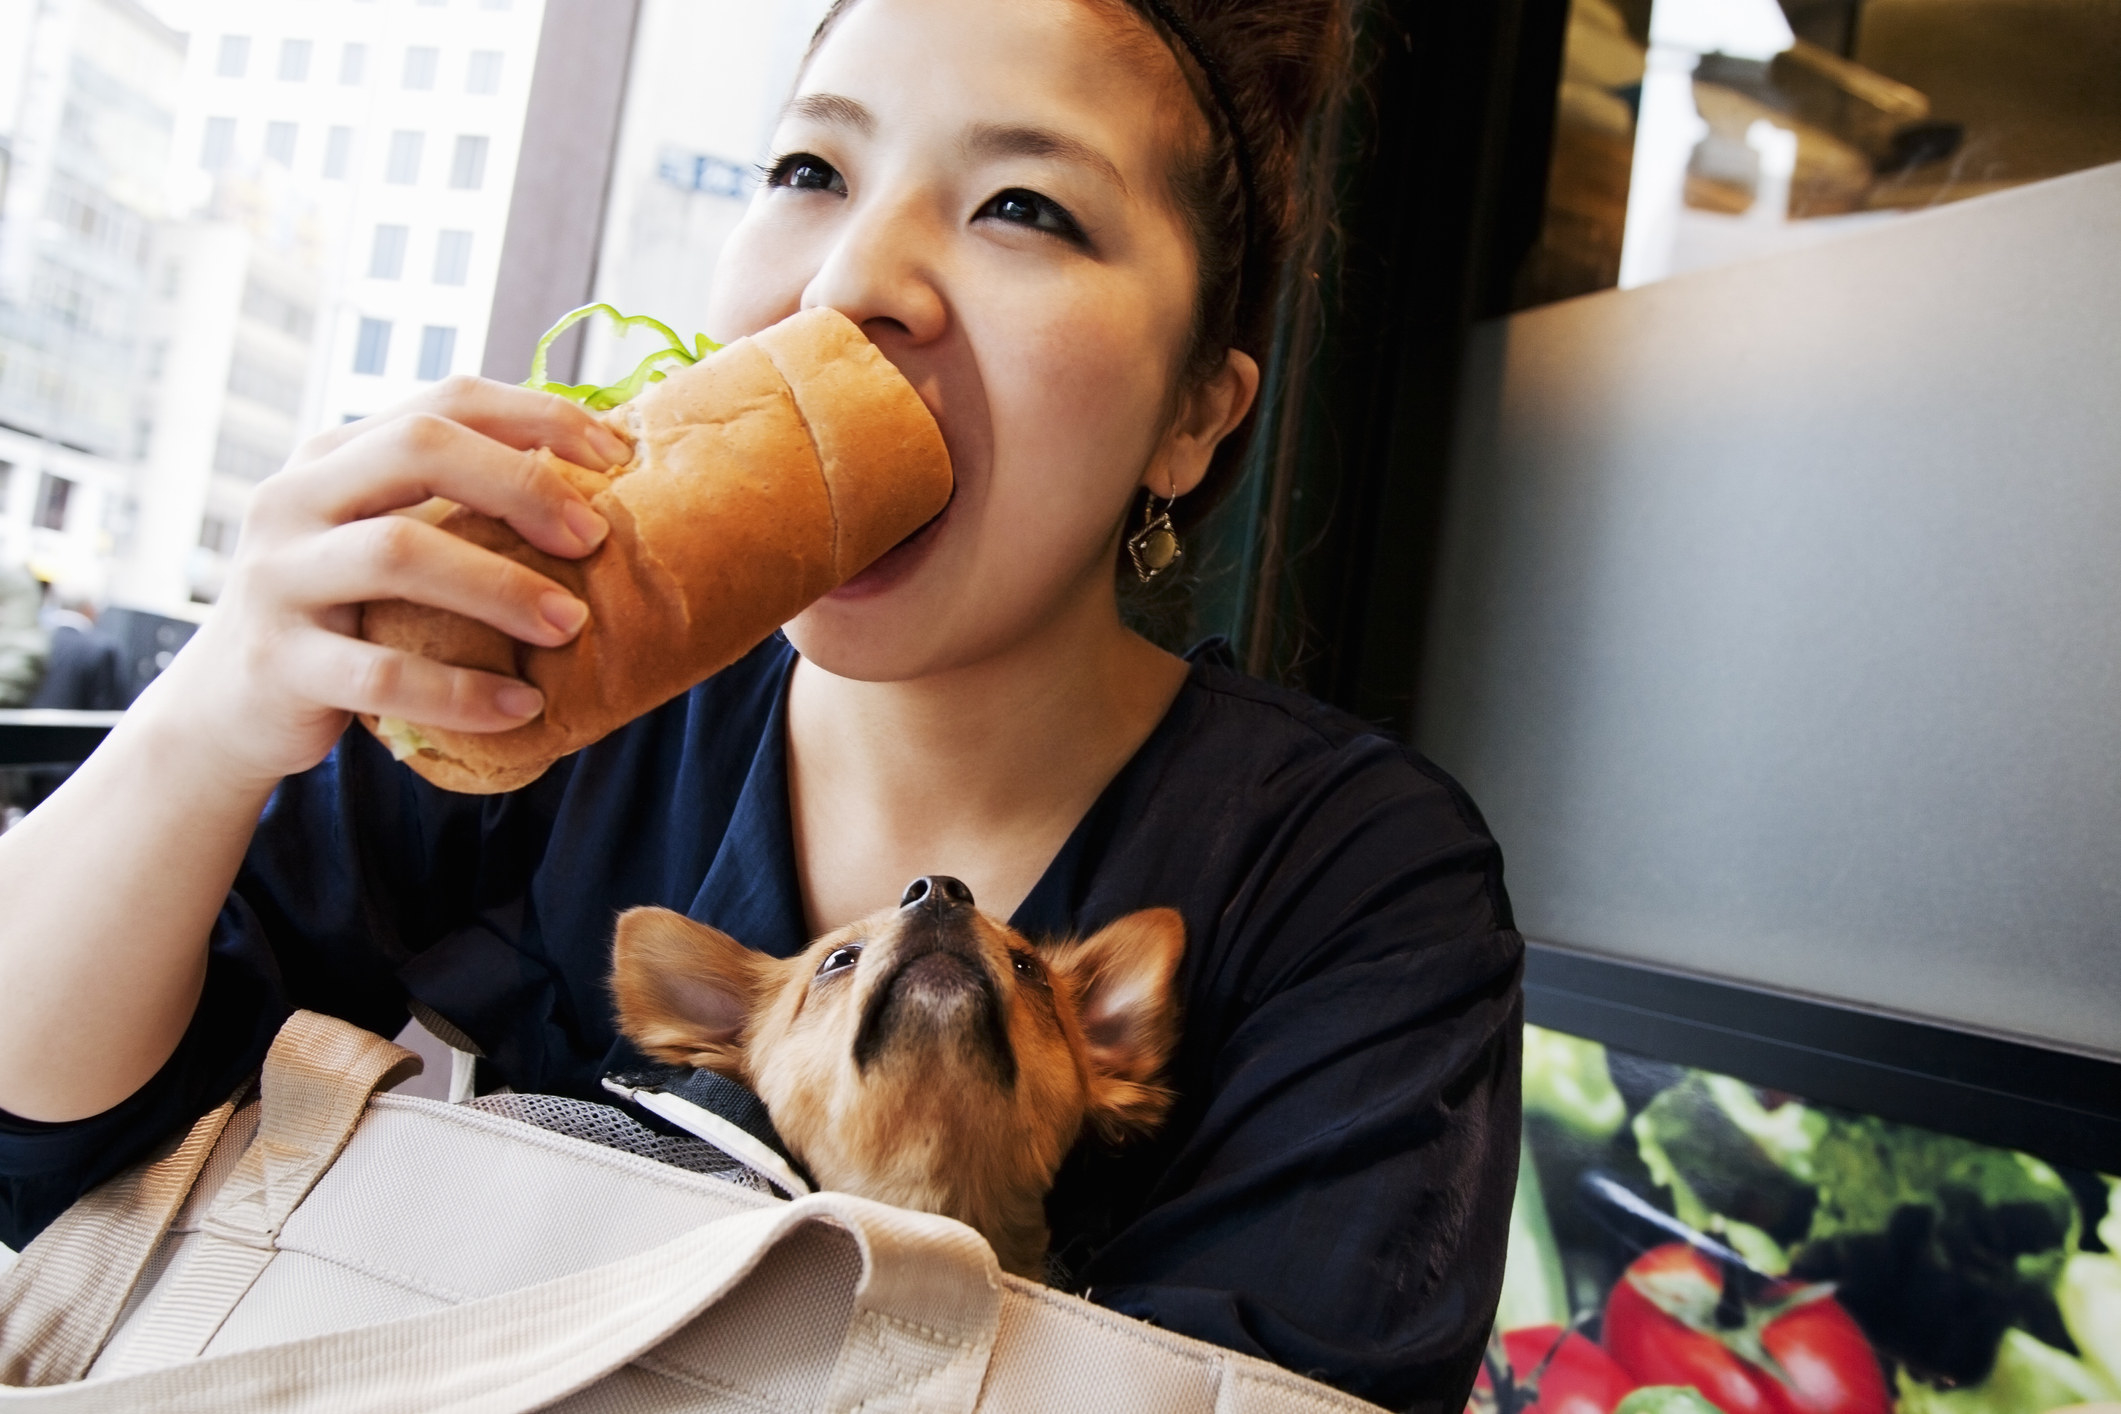 Woman eating a sandwich as her dog watches.